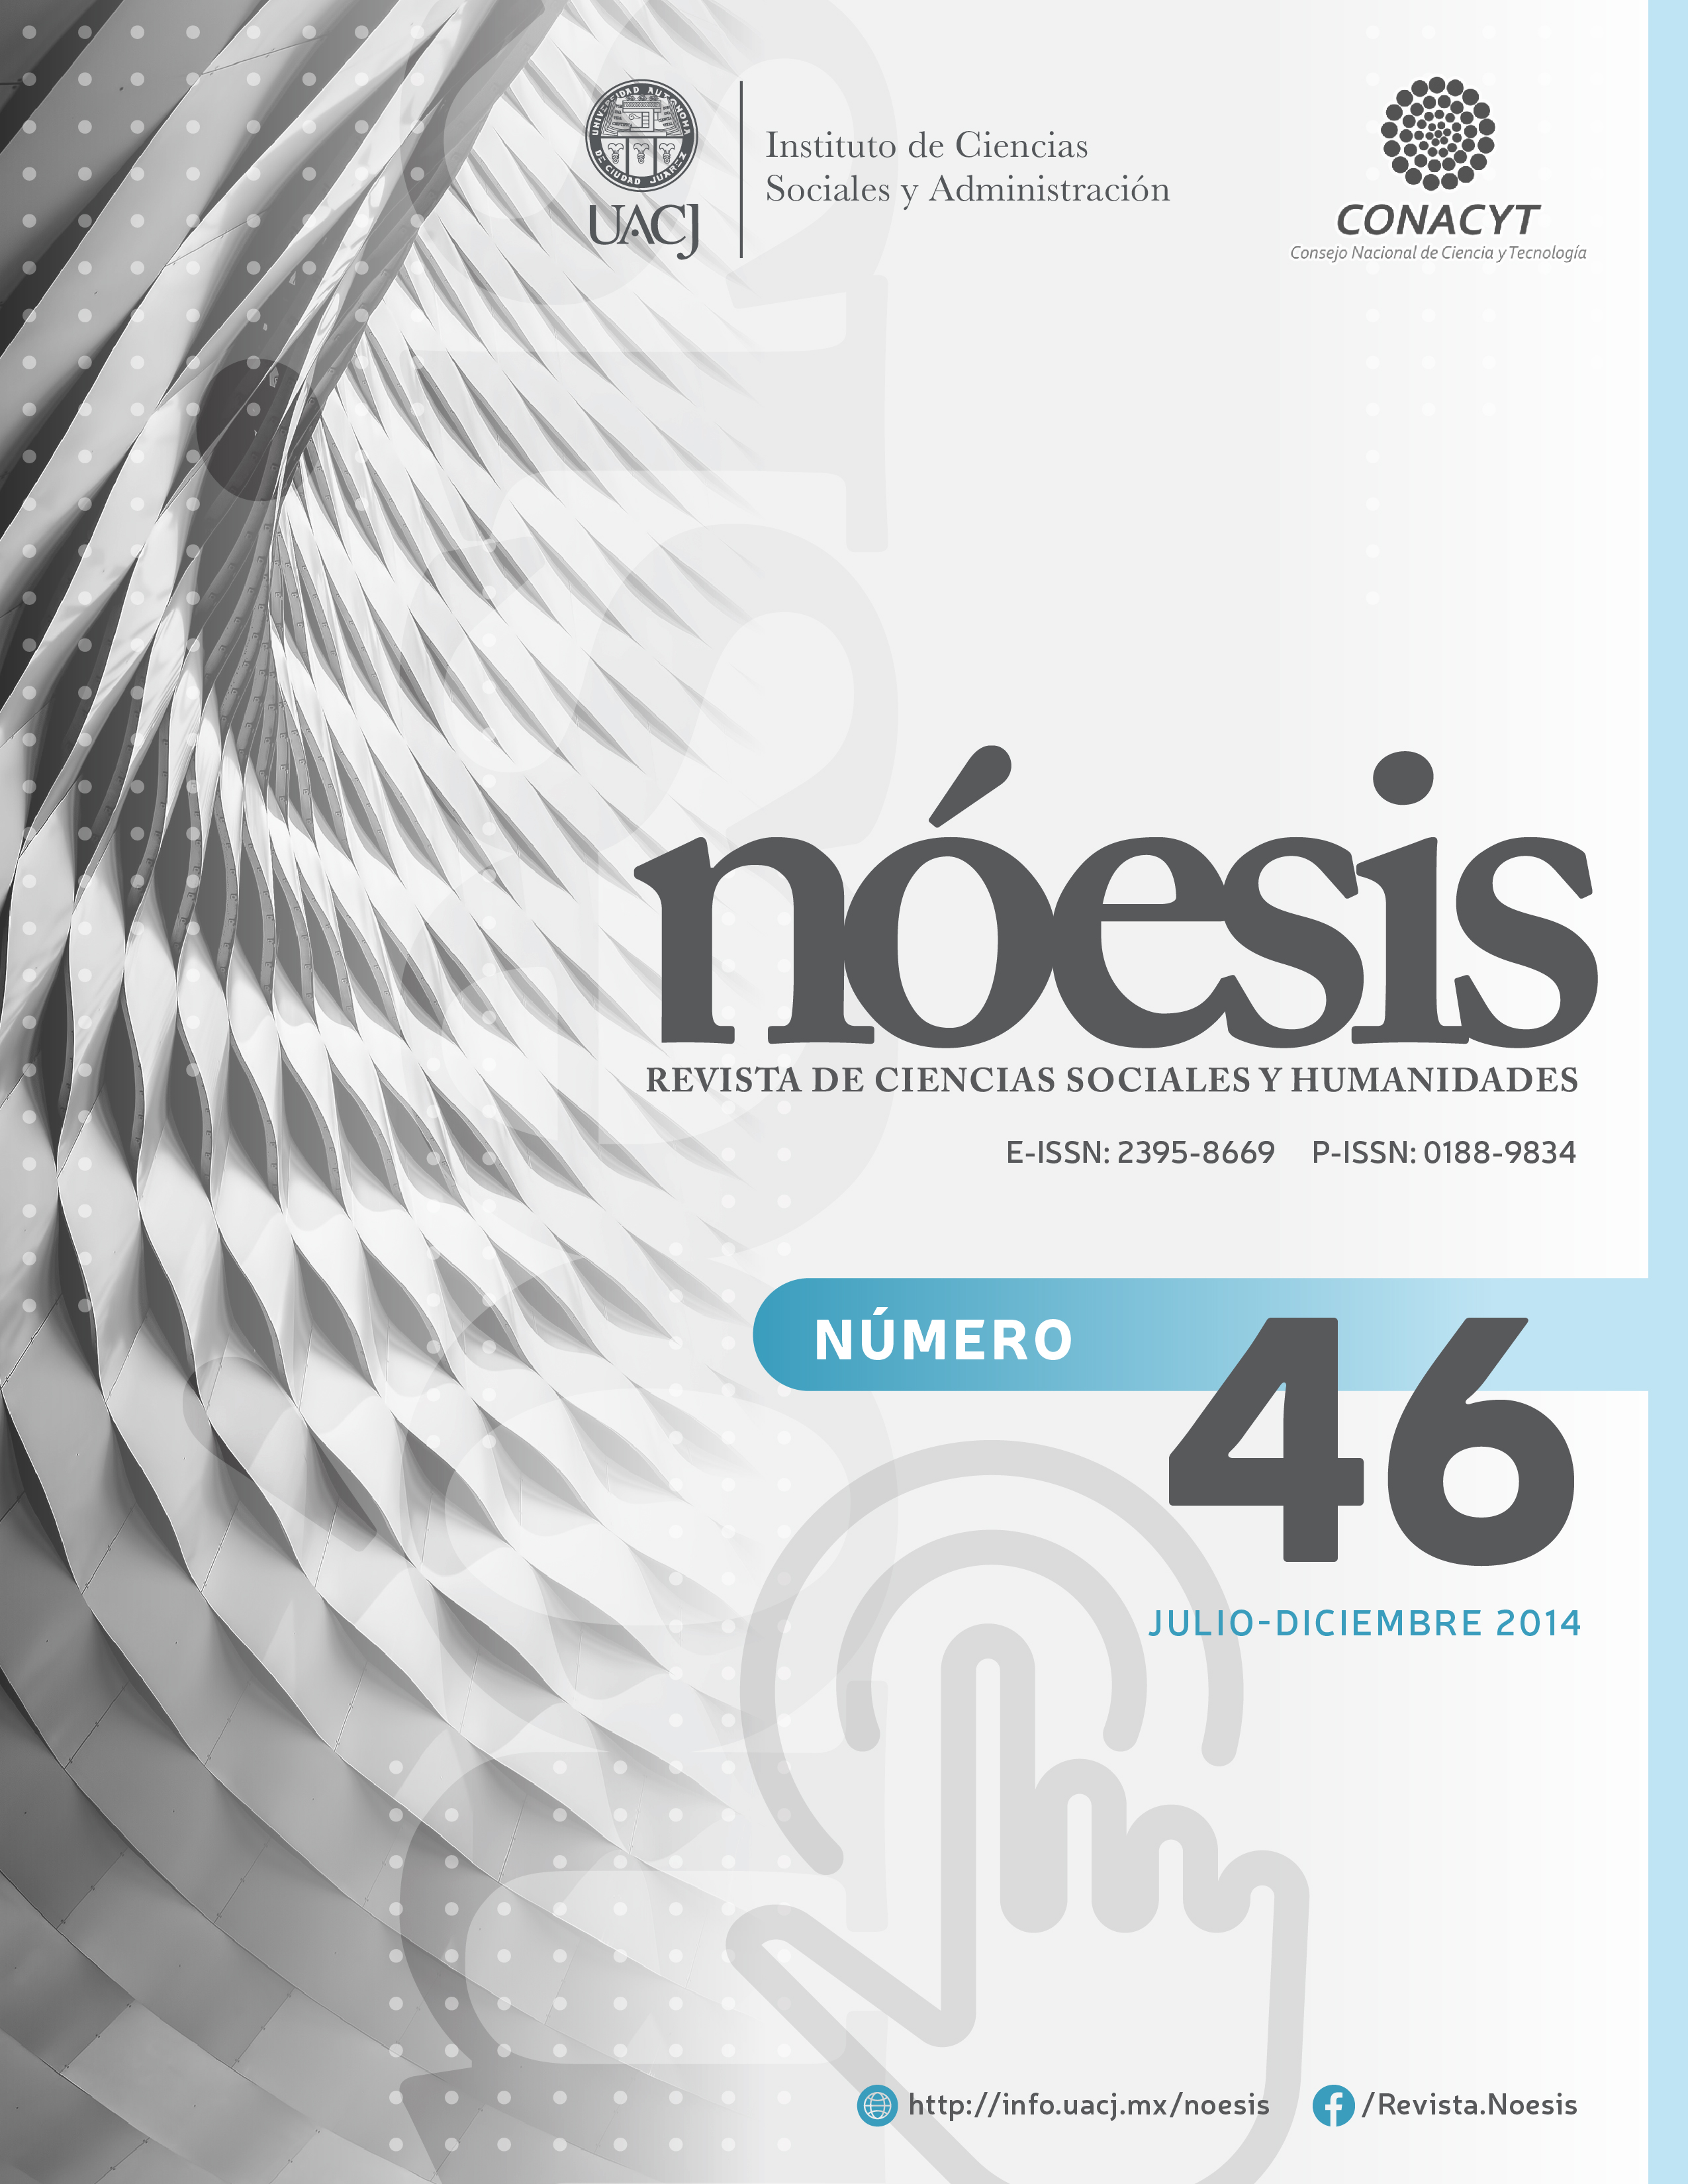 Literature review on continuous improvement in ibero-american MSMEs